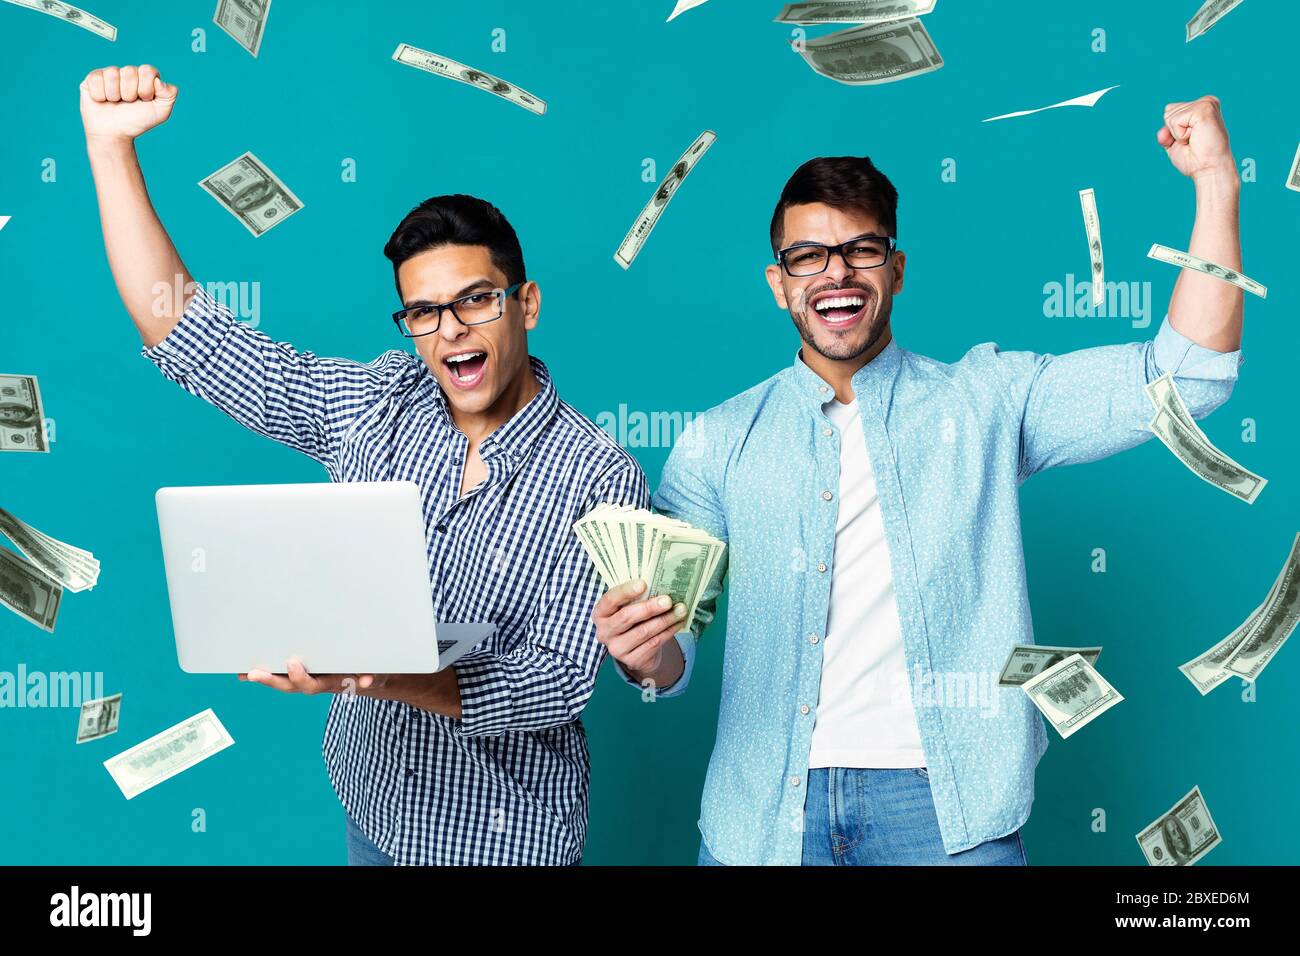 Sports Betting Online. Happy hispanic guys celebrating victory with laptop and cash Stock Photo